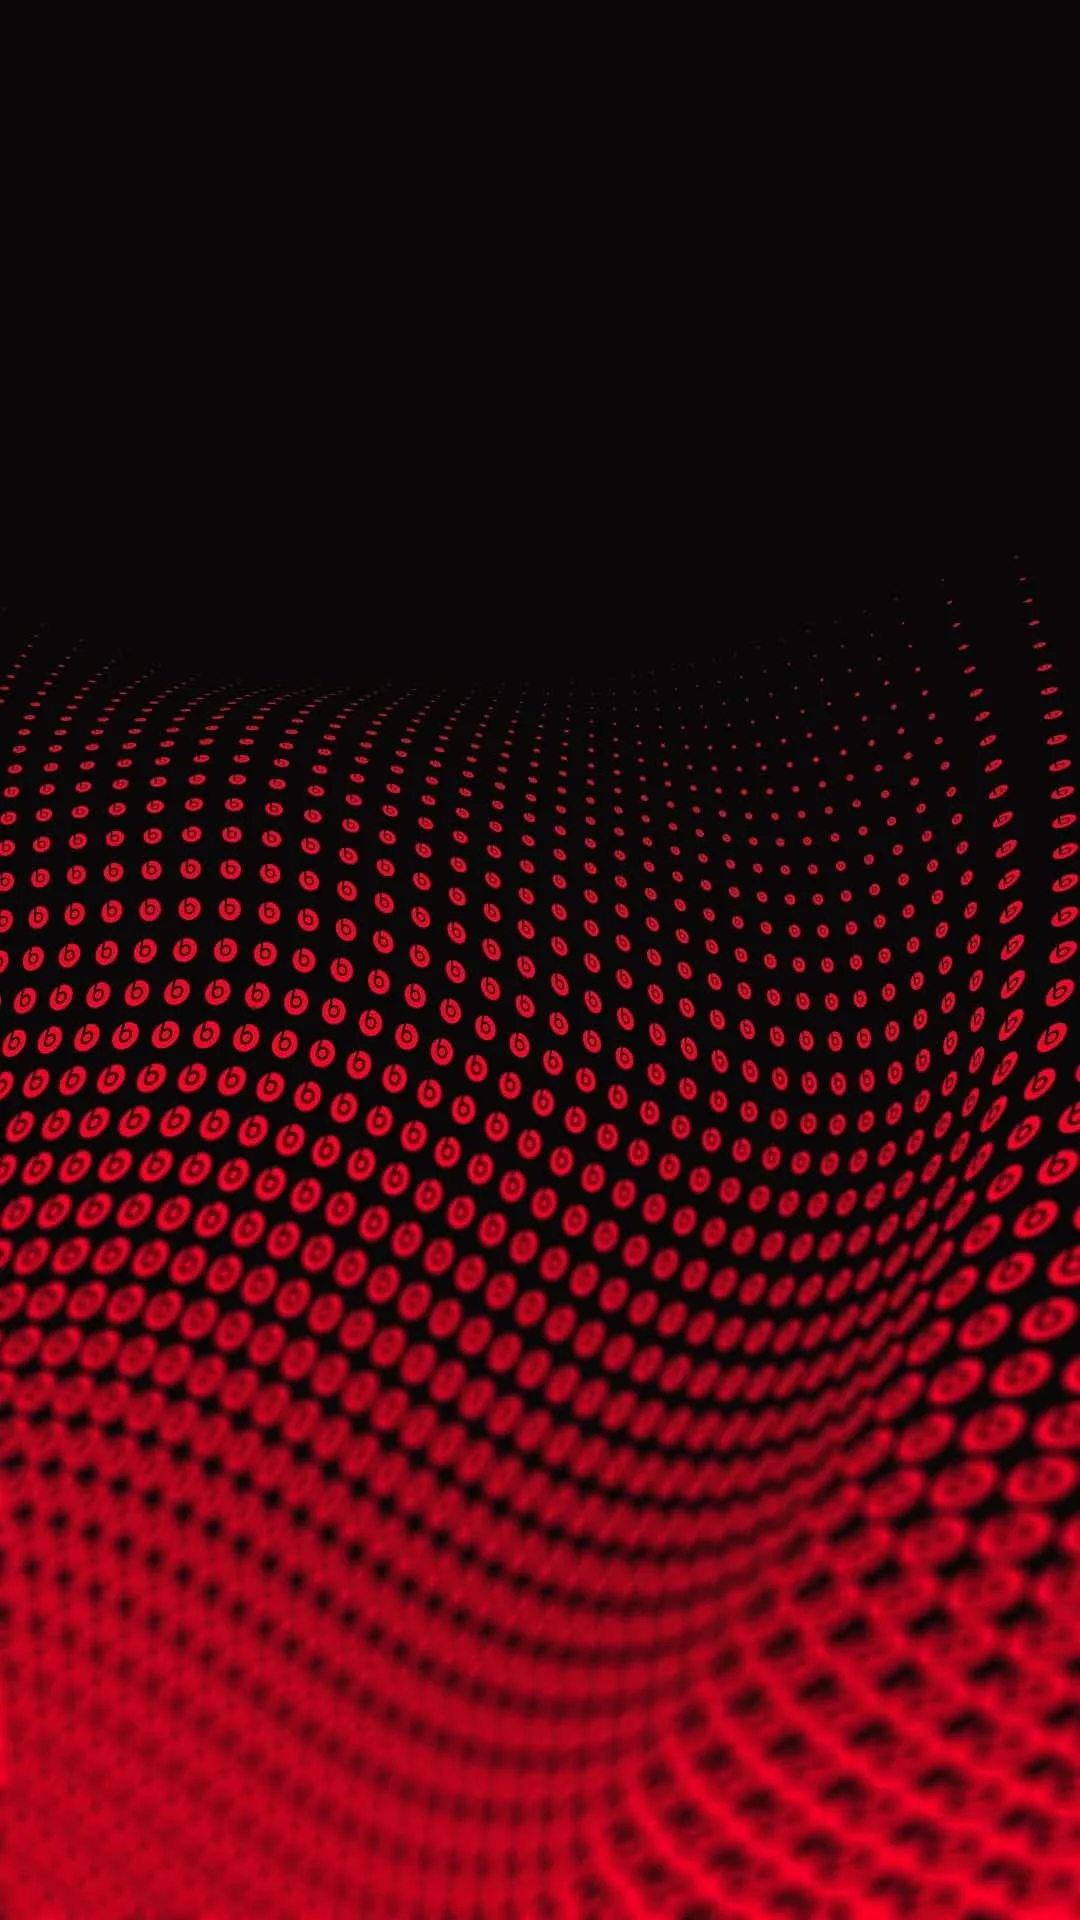 https://wallpaperformobile.org/14368/red-abstract-wallpaper.